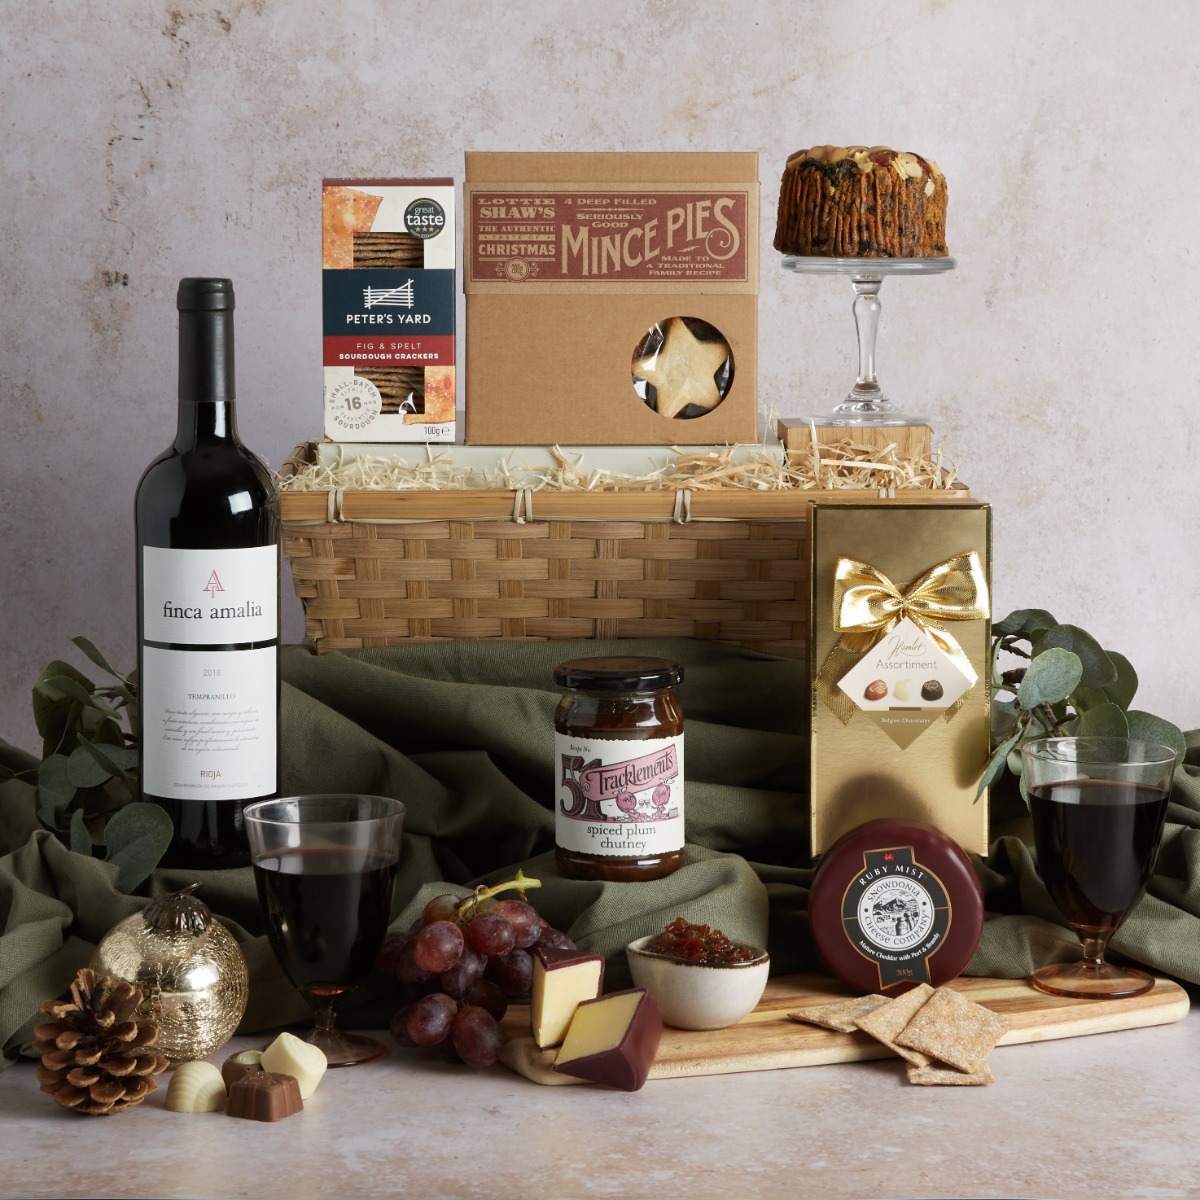 The Classic Christmas hamper with festive contents on display